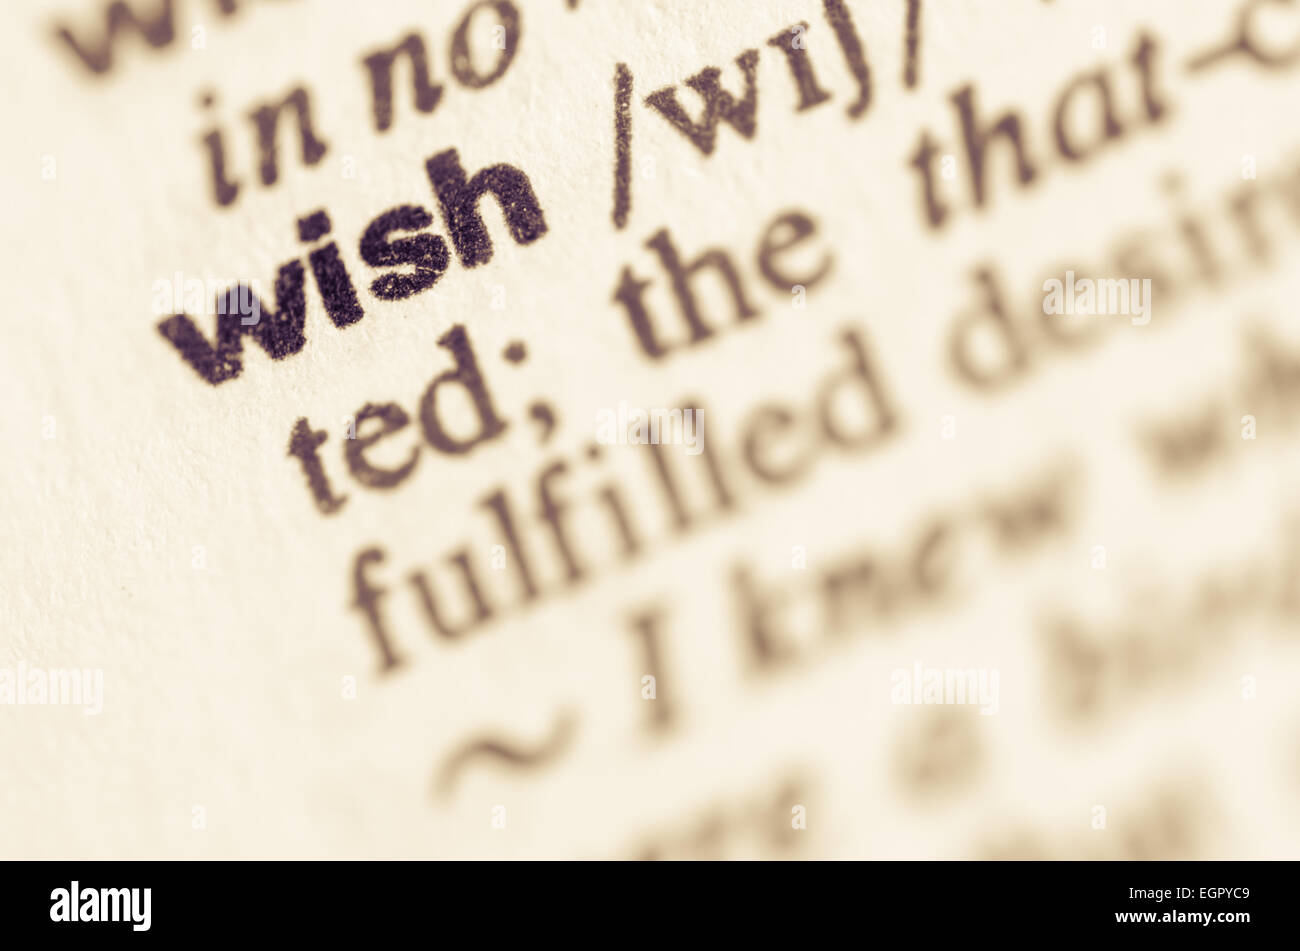 Definition of word wish in dictionary Stock Photo